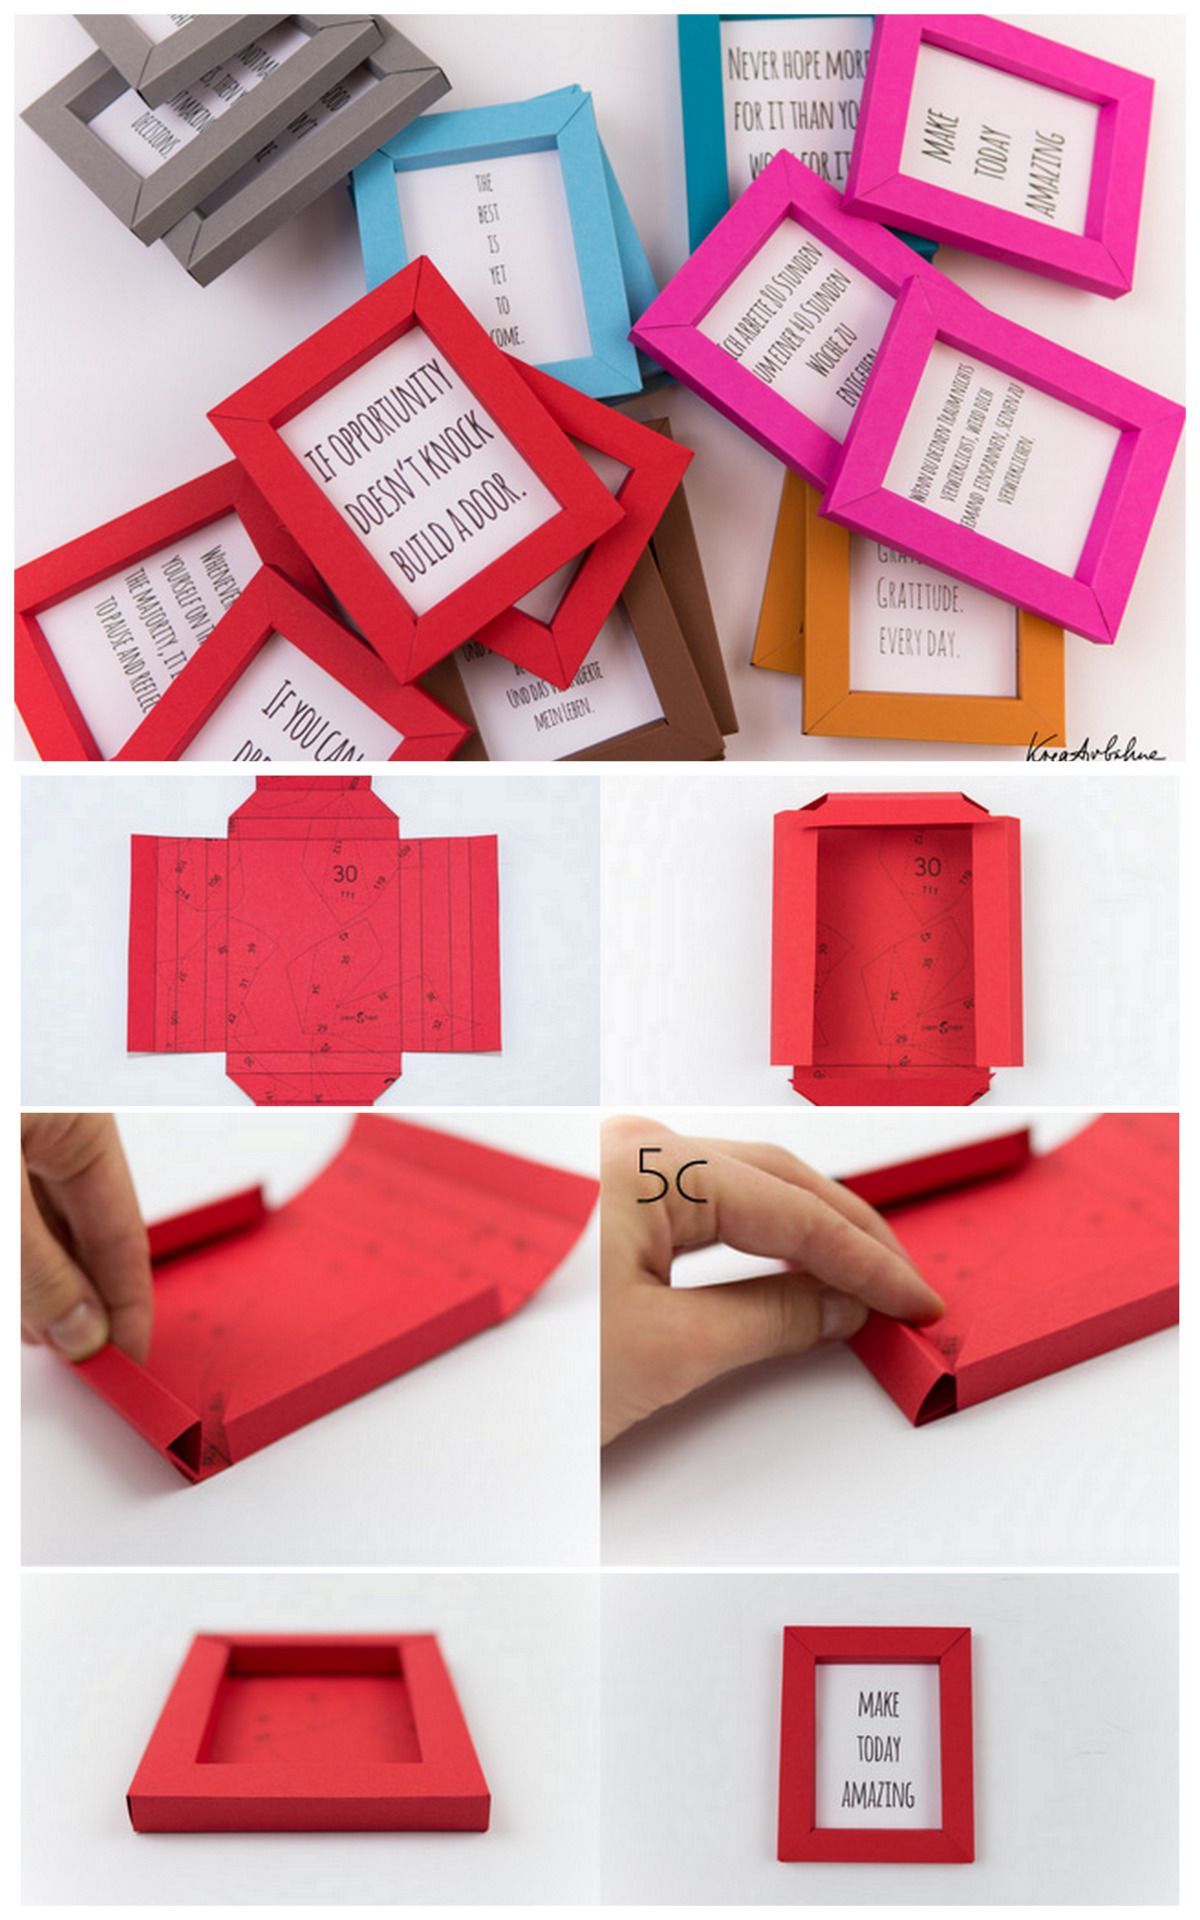 truebluemeandyou:DIY Paper Frame Tutorial and Printable from kreativbuehne. These folded paper frames are quite small – but nice